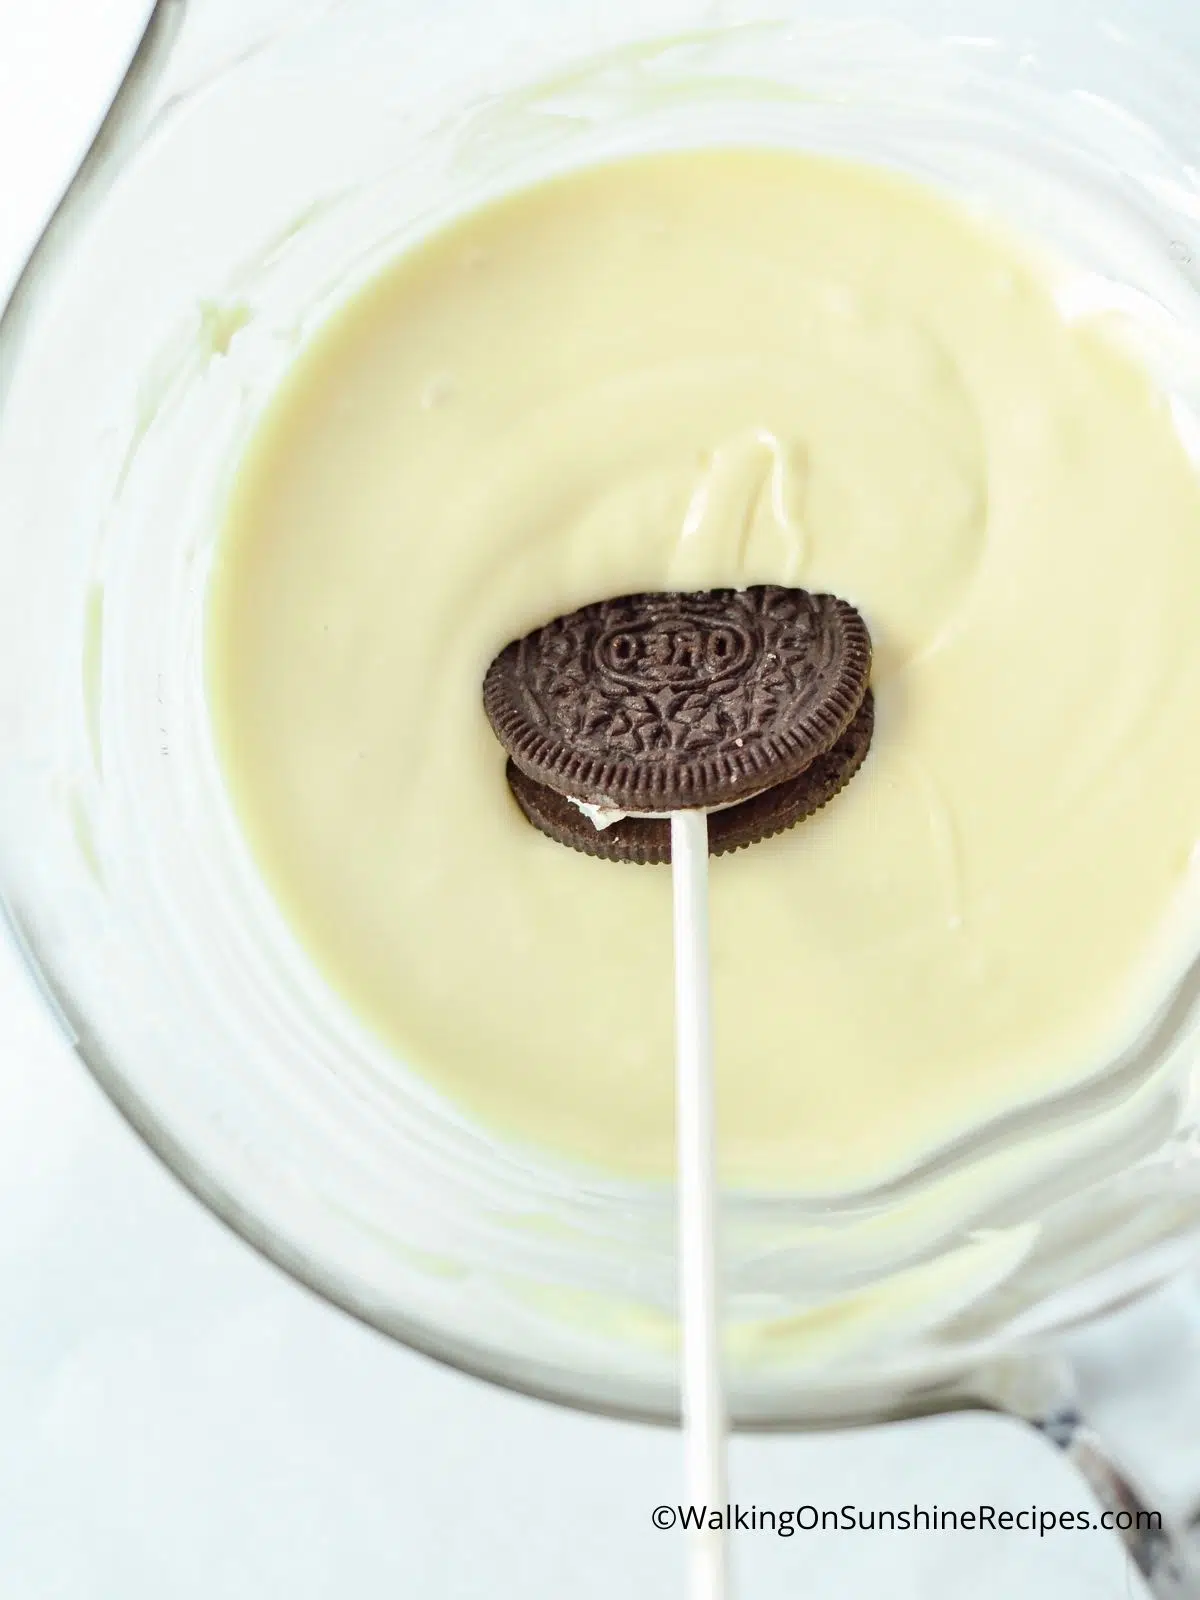 Dipping Oreo cookie on a stick in melted white chocolate.